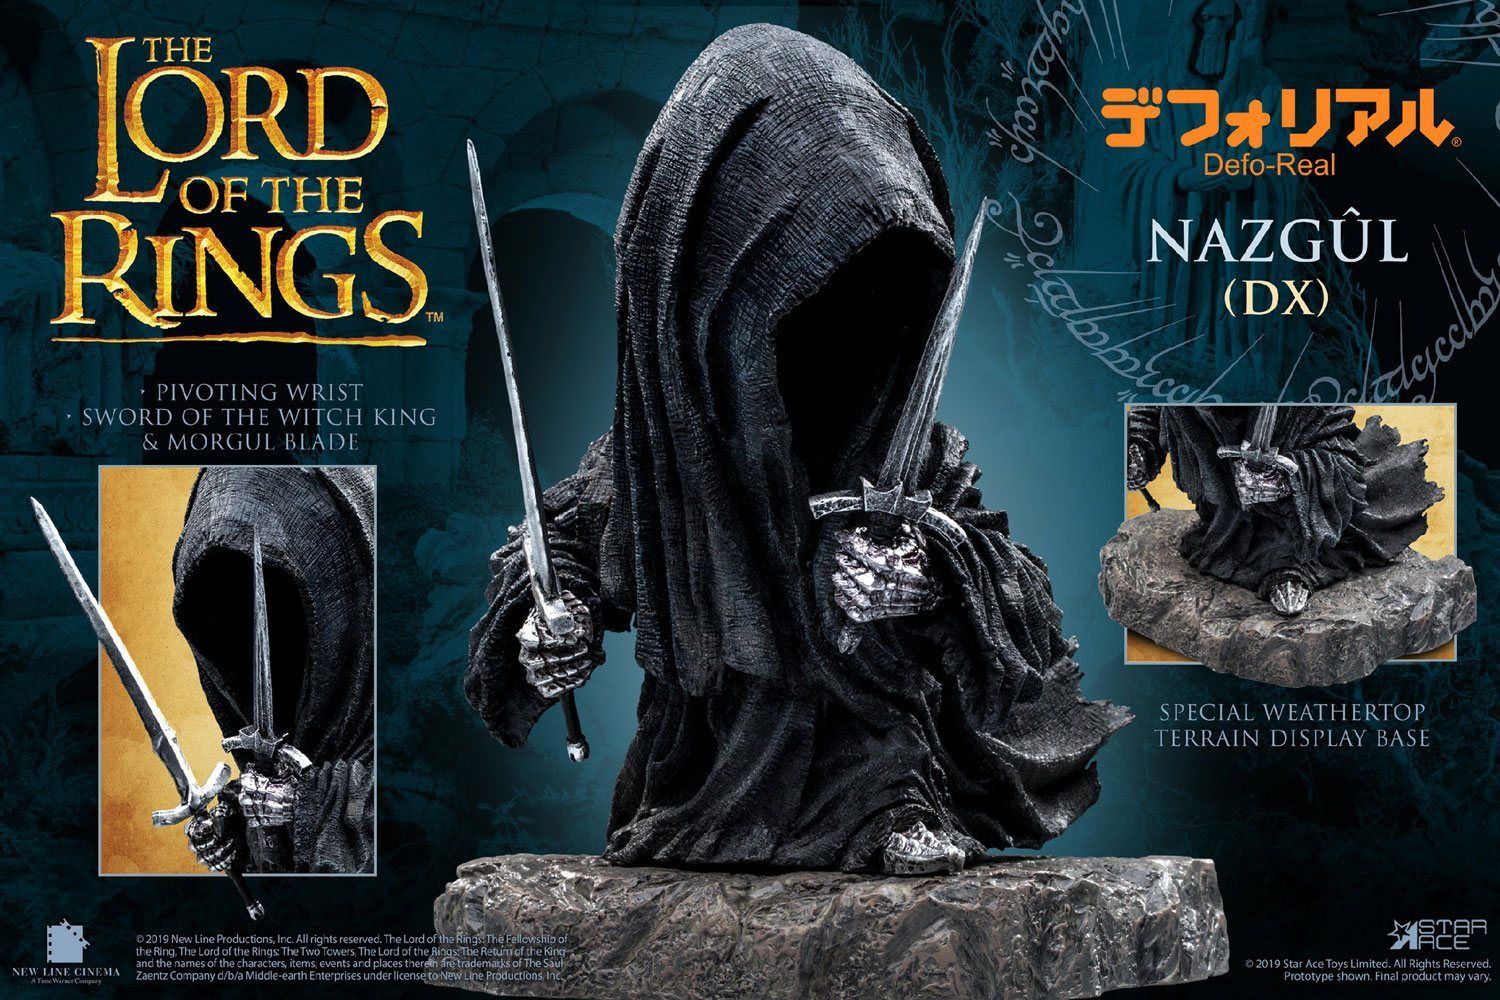 Lord of the Rings Defo-Real Series Soft vinylová Figure Nazgul Deluxe Verze 15 cm Star Ace Toys